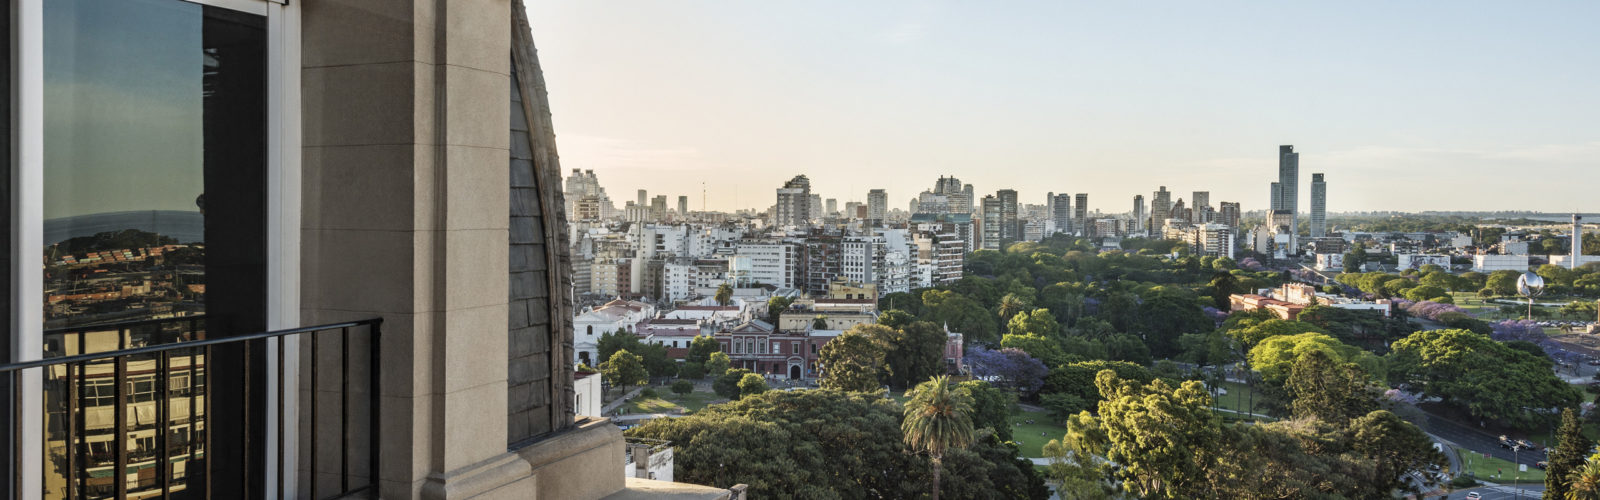 alvear-palace-hotel-view